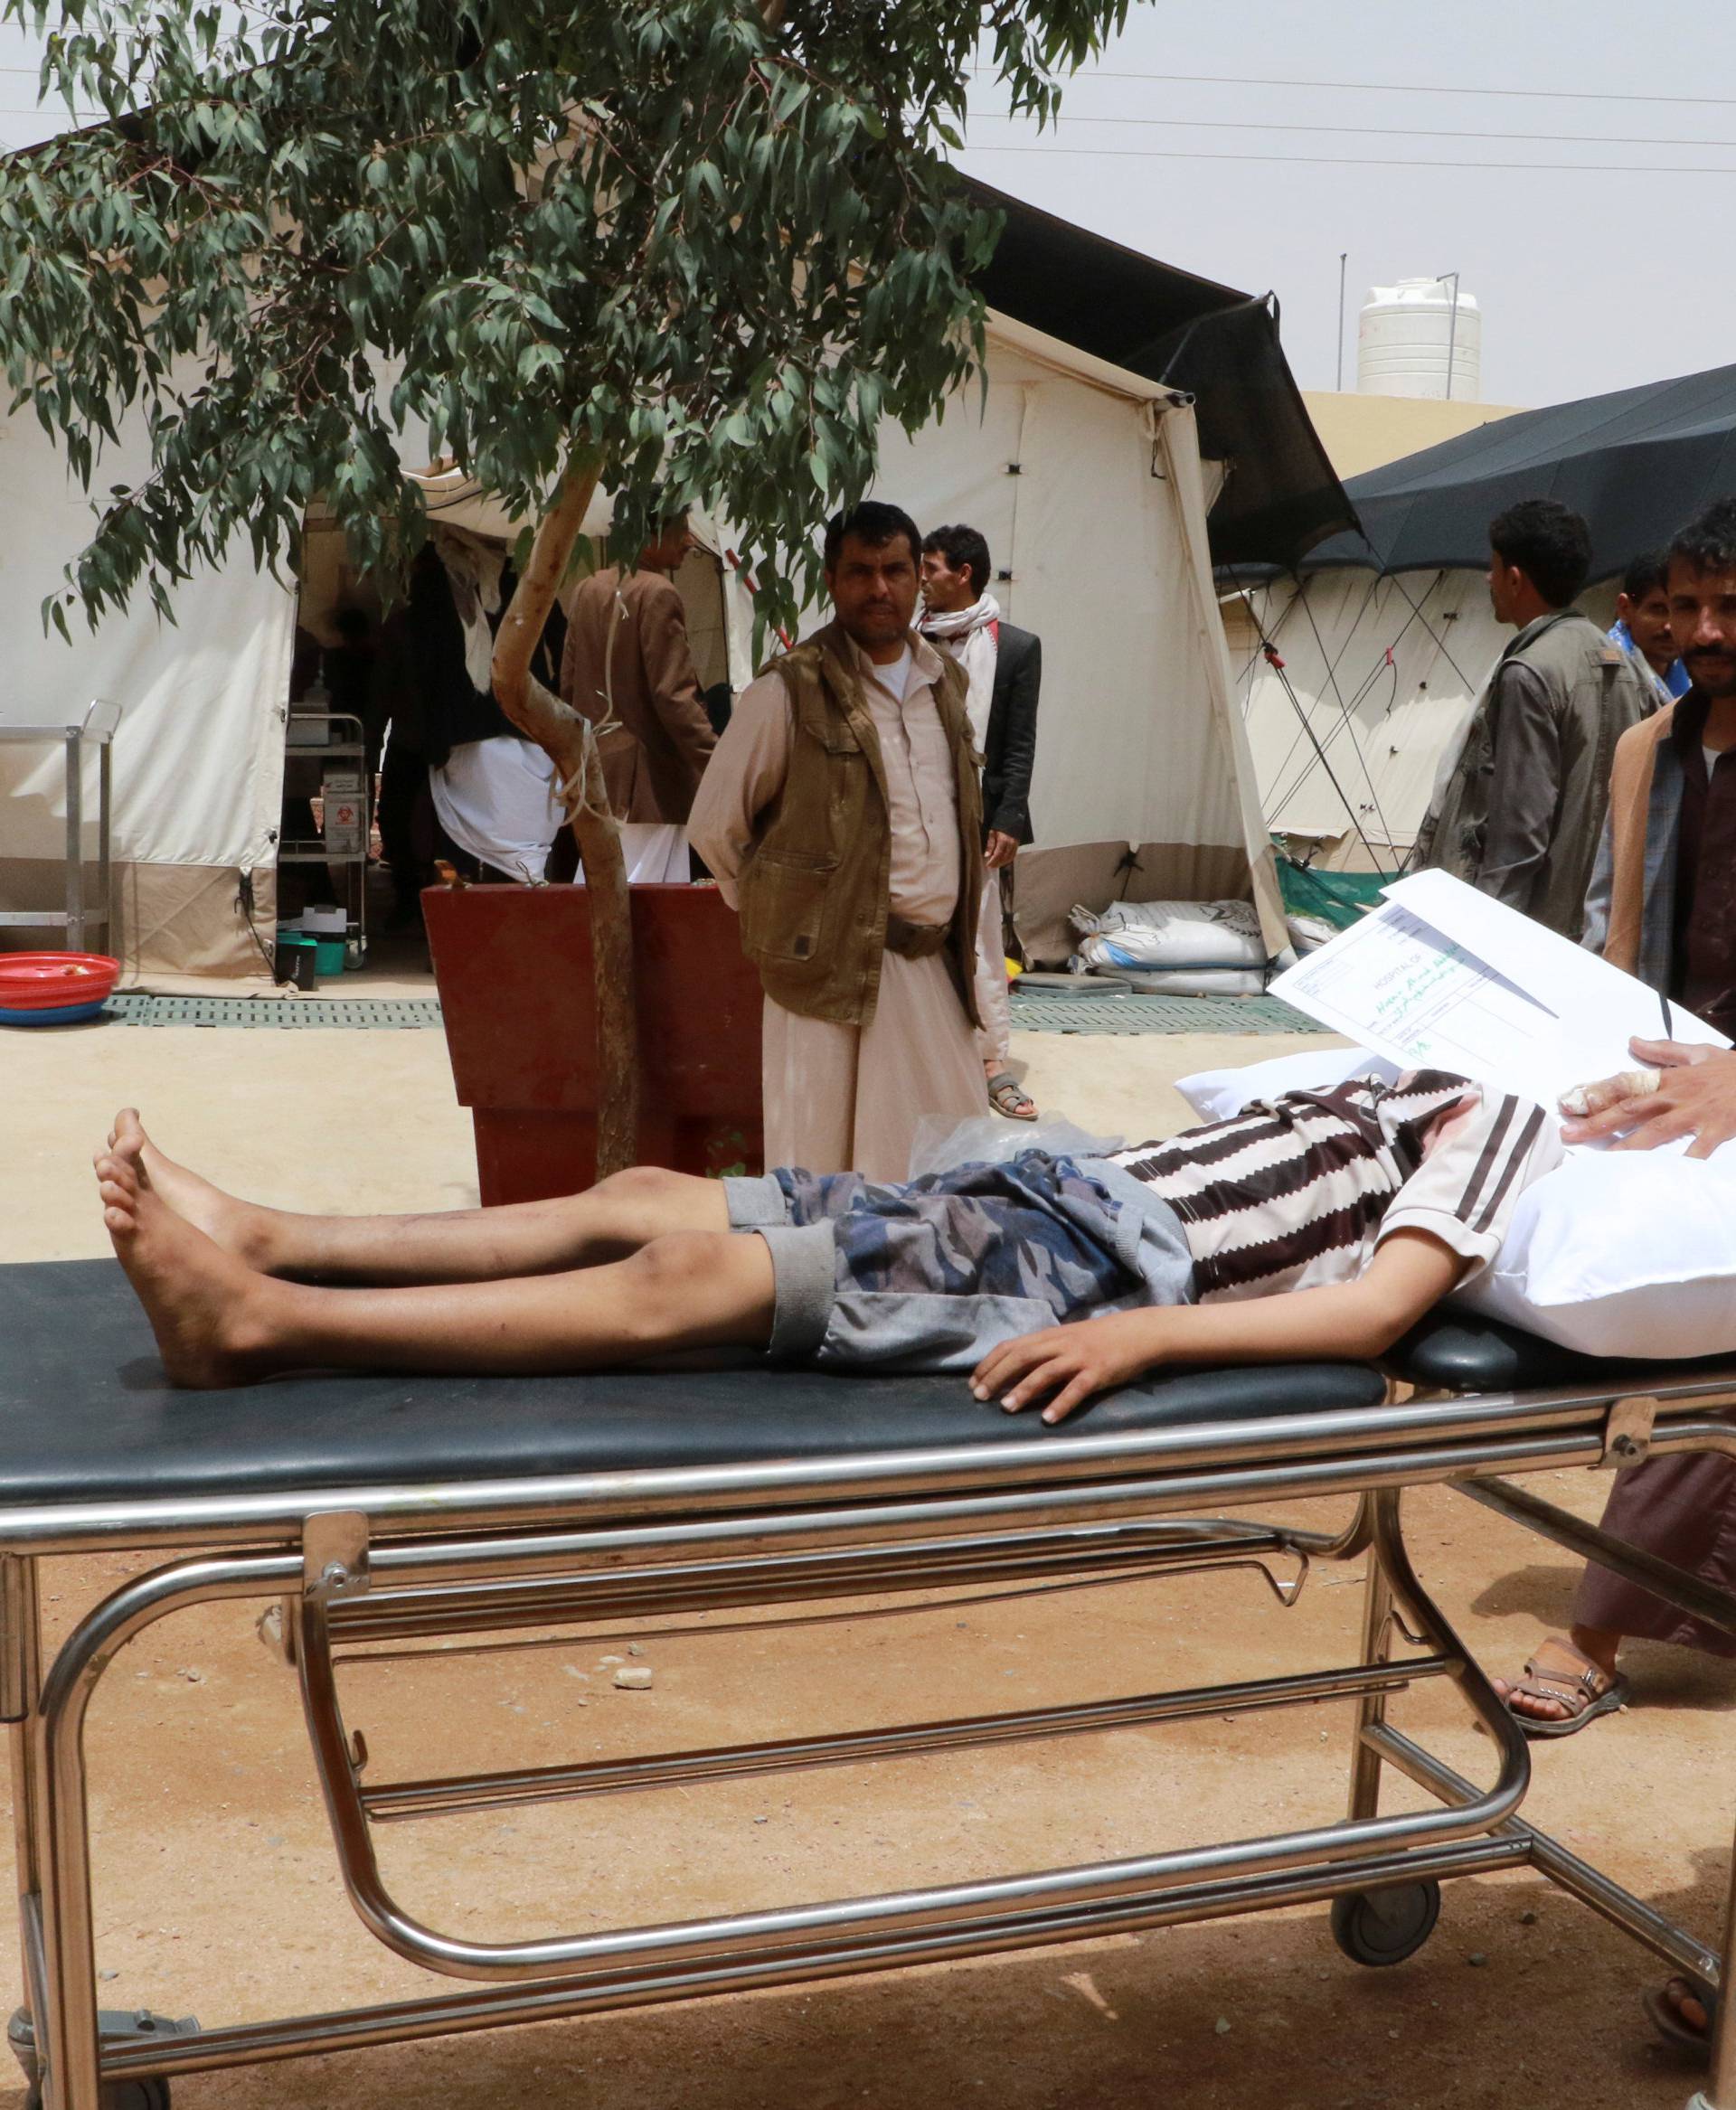 A Yemeni boy lies on at stretcher after being injured by an airstrike in Saada